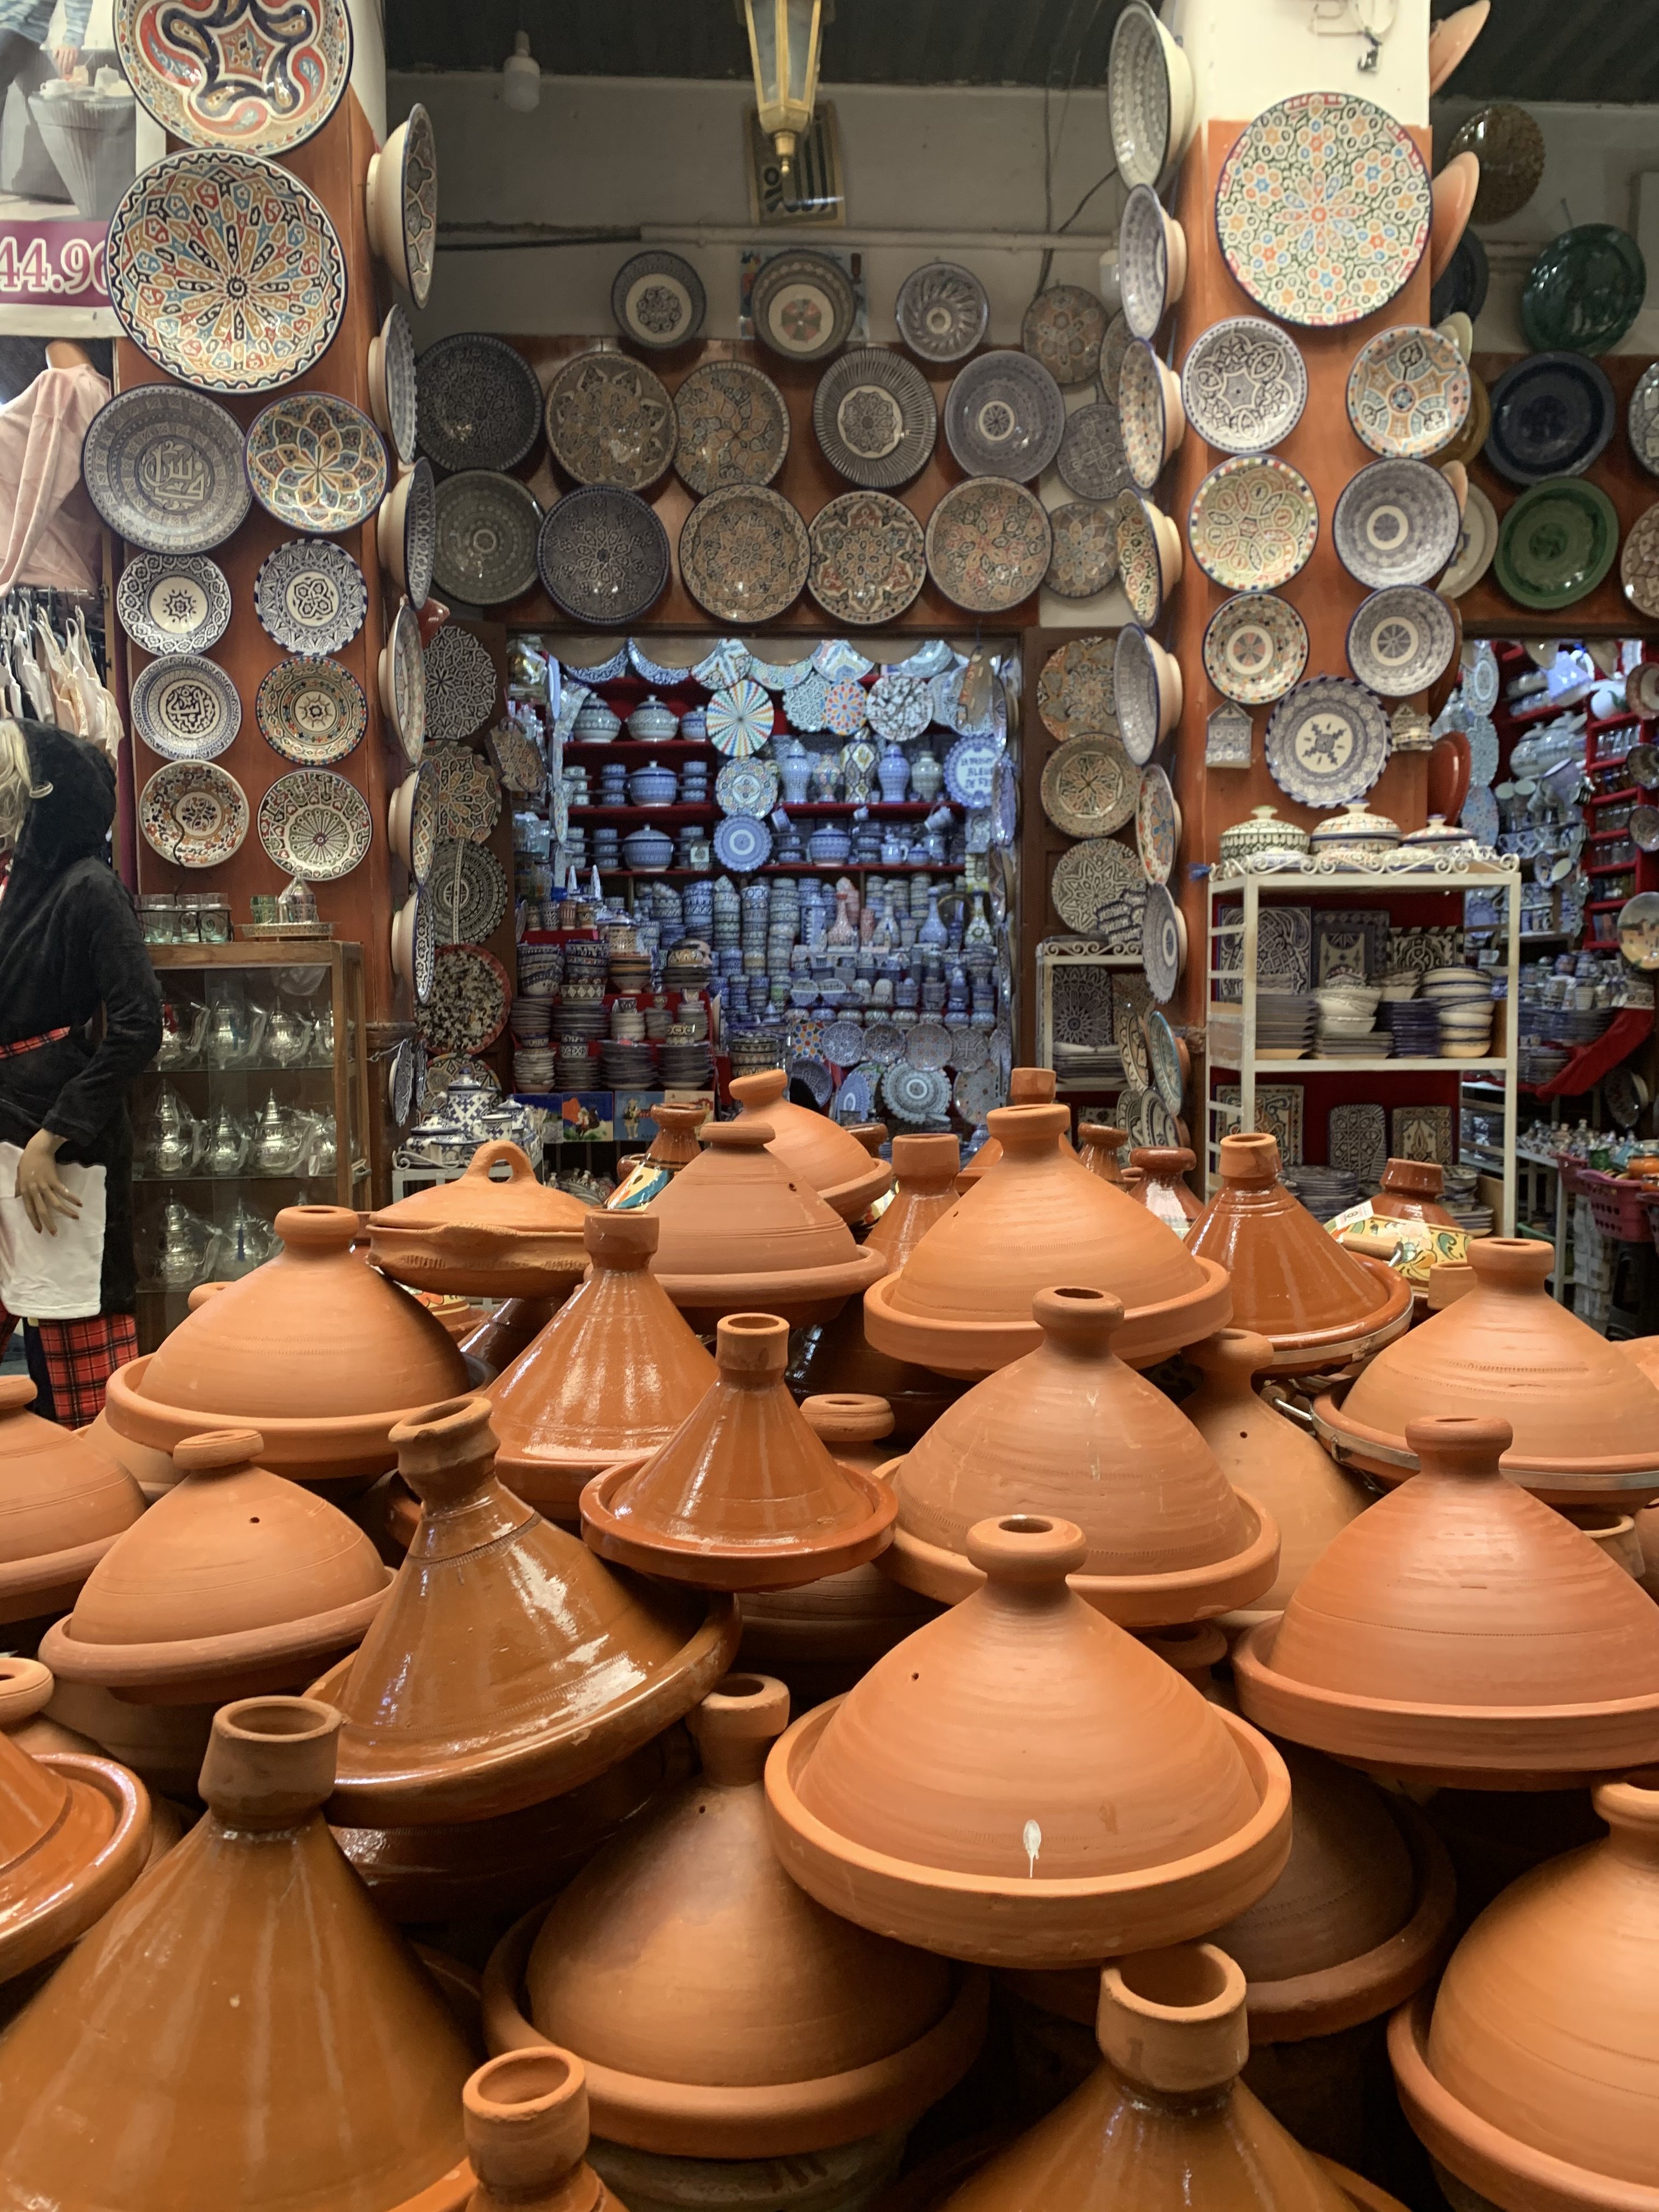 Pottery shop with Tagines in the front; lots of decorative plates and blowls on the walls.